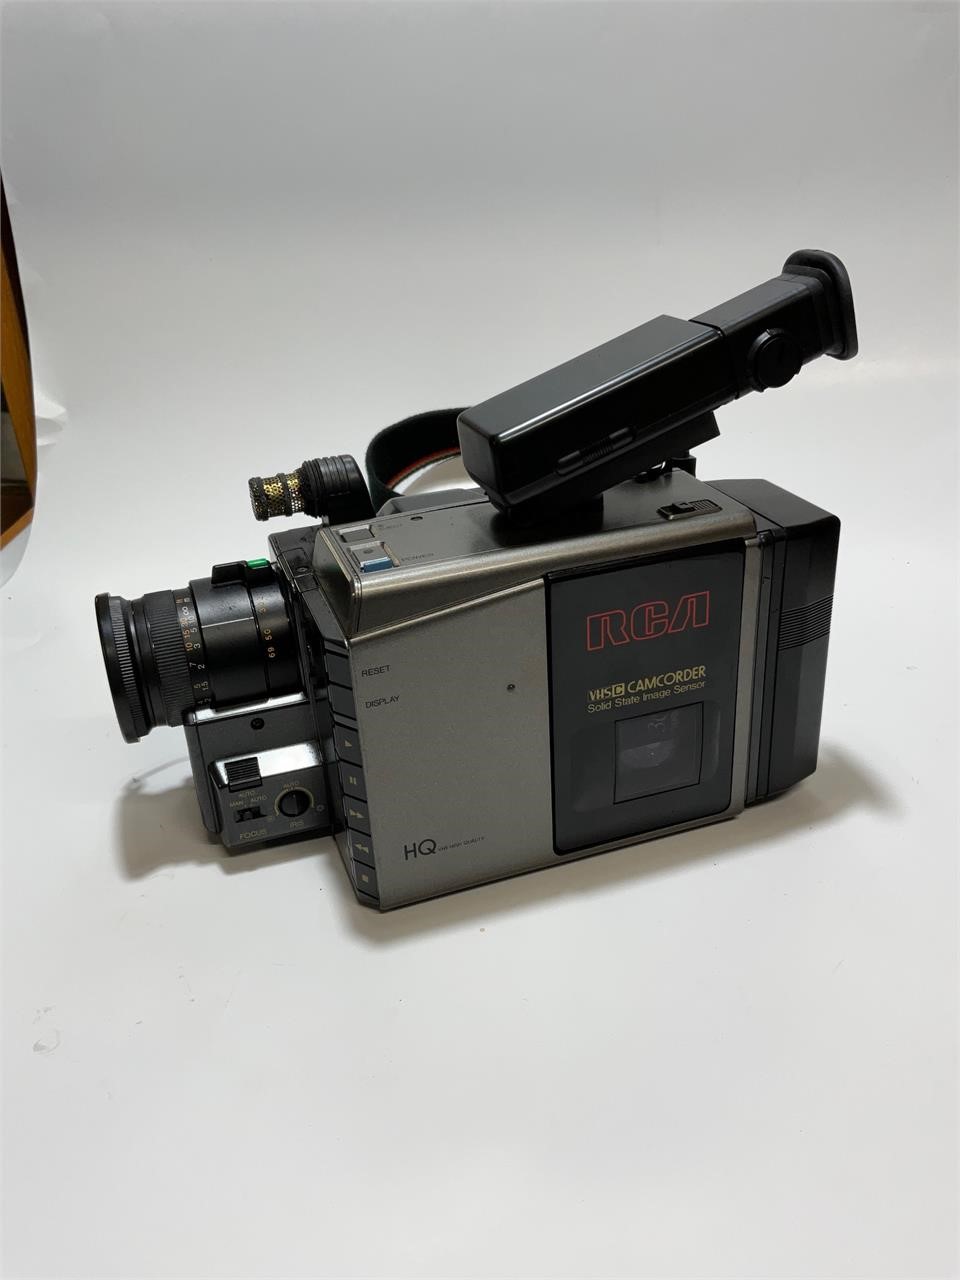 RCA - VHS C - camcorder video recorder w/ case